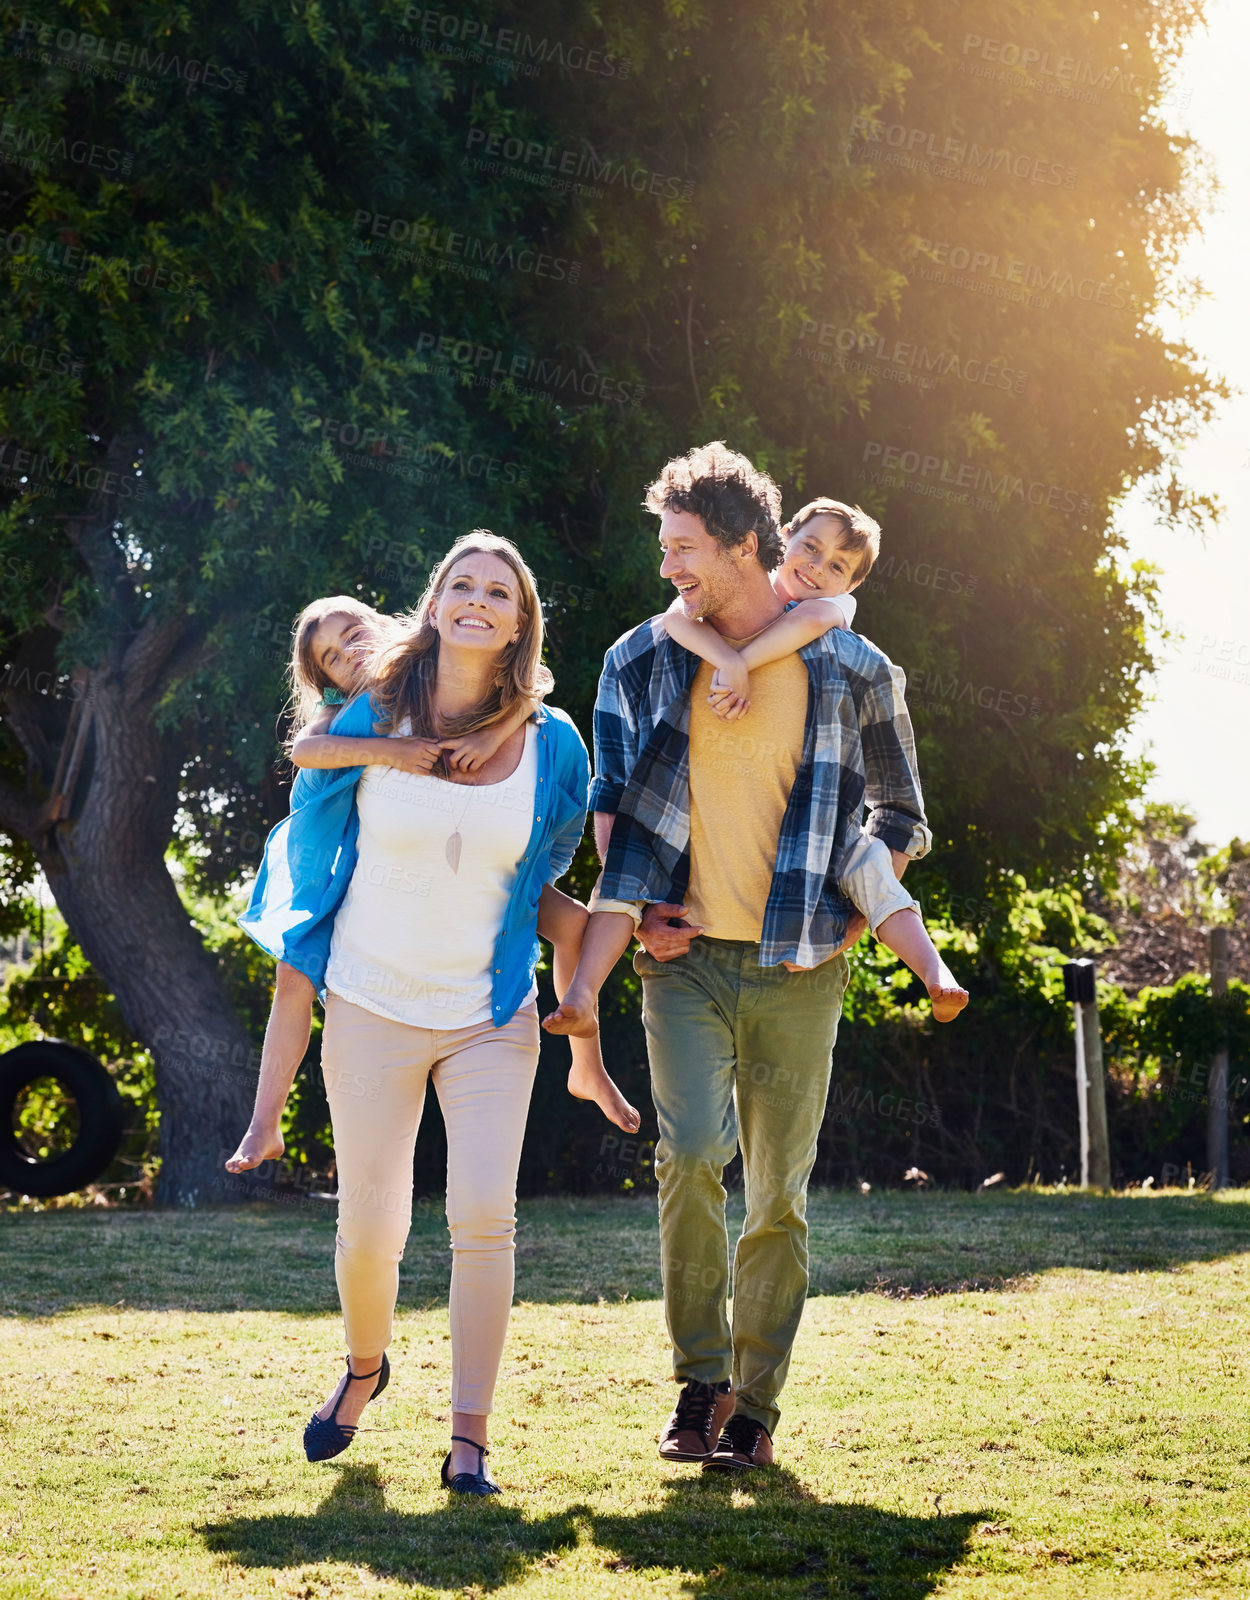 Buy stock photo Family, happy and piggyback in garden with playing for bonding, weekend fun and games in home with sunshine. Parents, kids and carry on back for summer, outdoor scenery and people on adventure